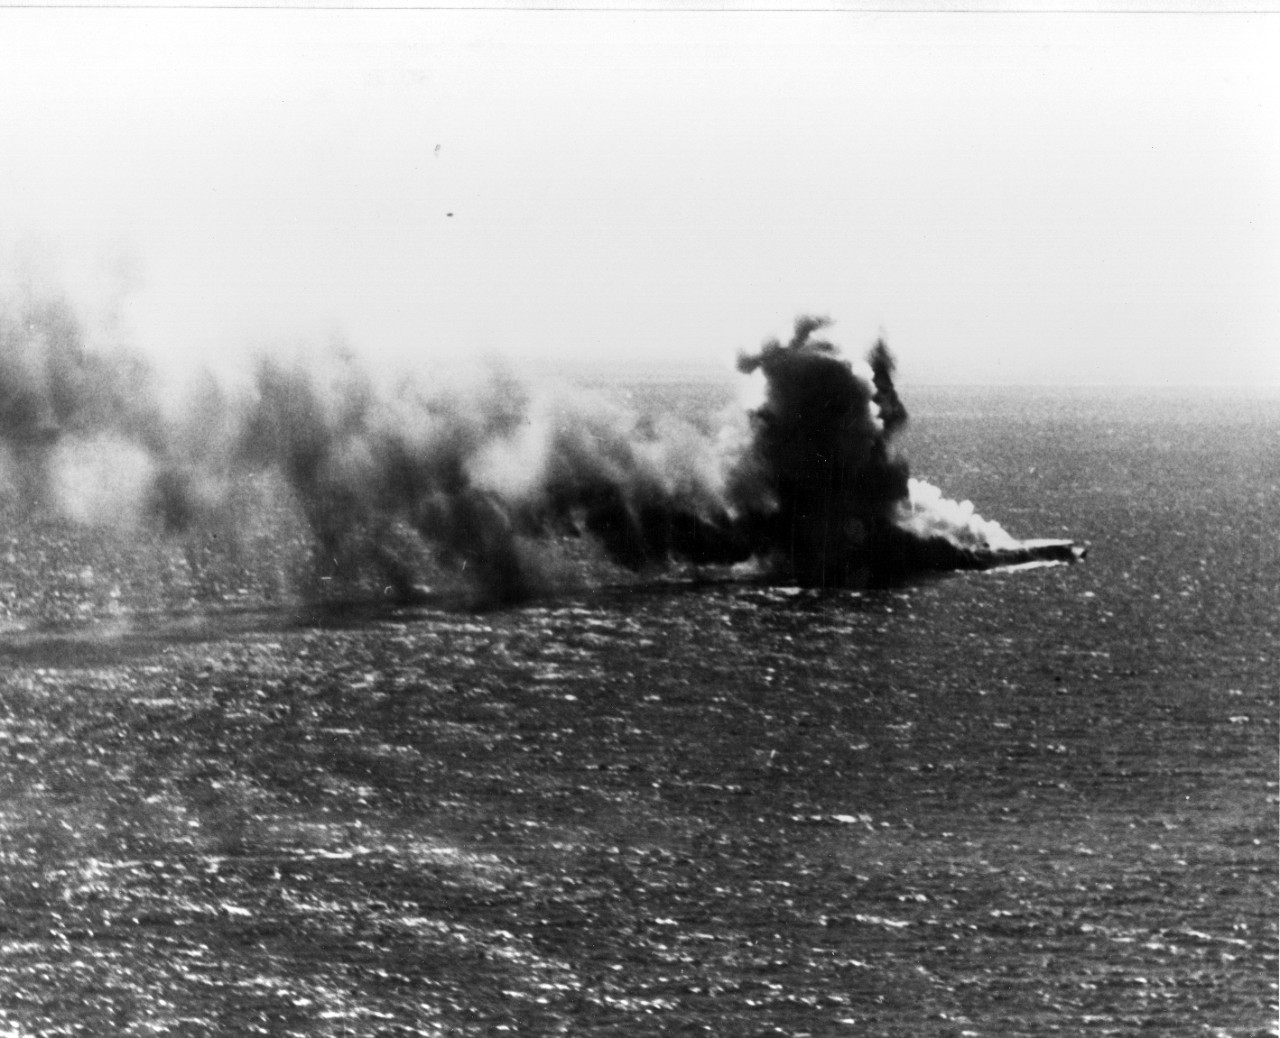 Photo #: 80-G-17046  Battle of Coral Sea, May 1942